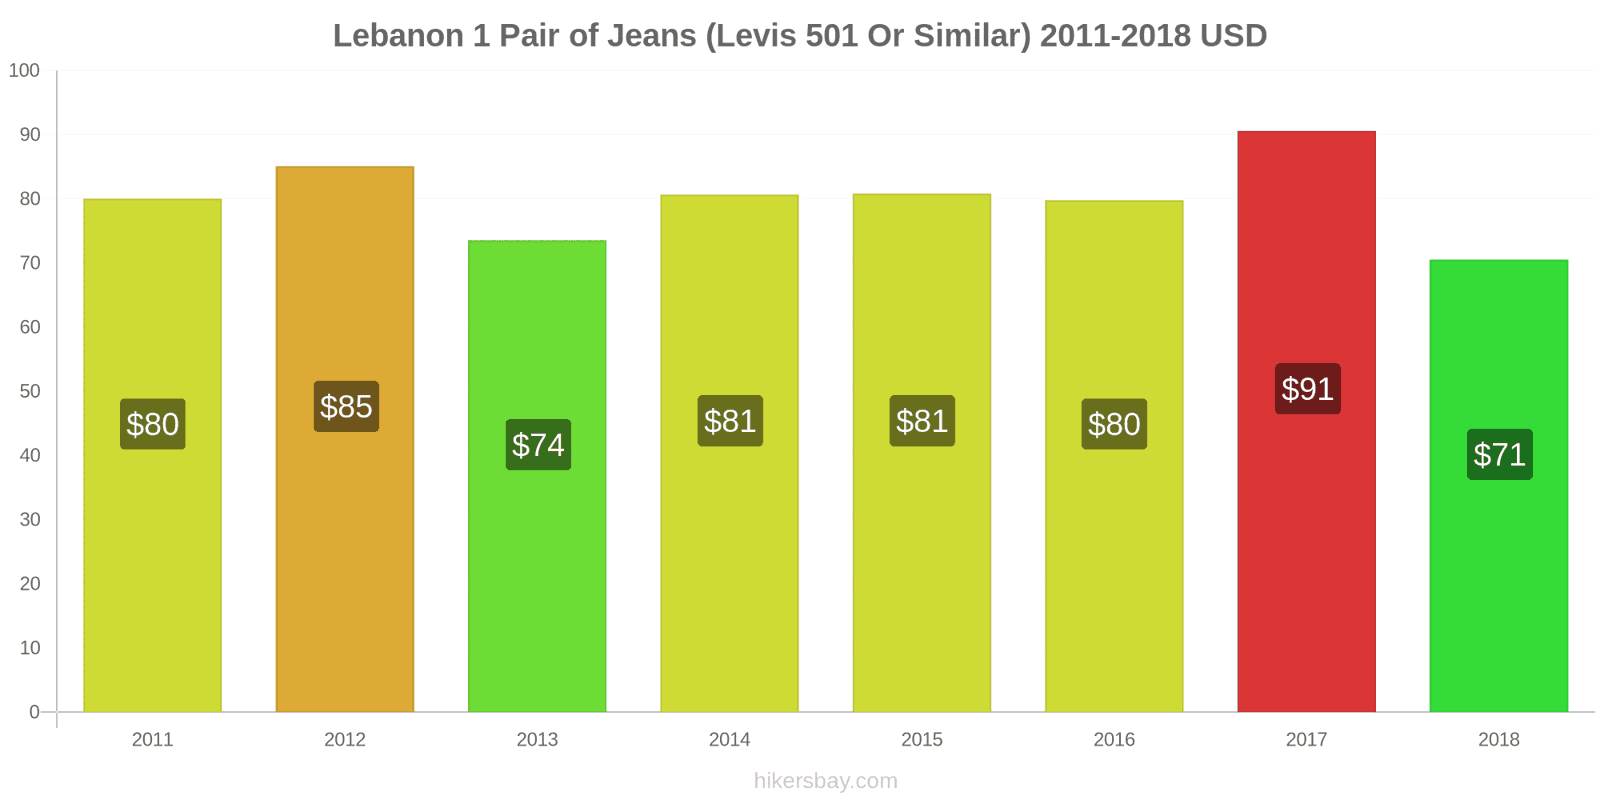 Lebanon price changes 1 pair of jeans (Levis 501 or similar) hikersbay.com